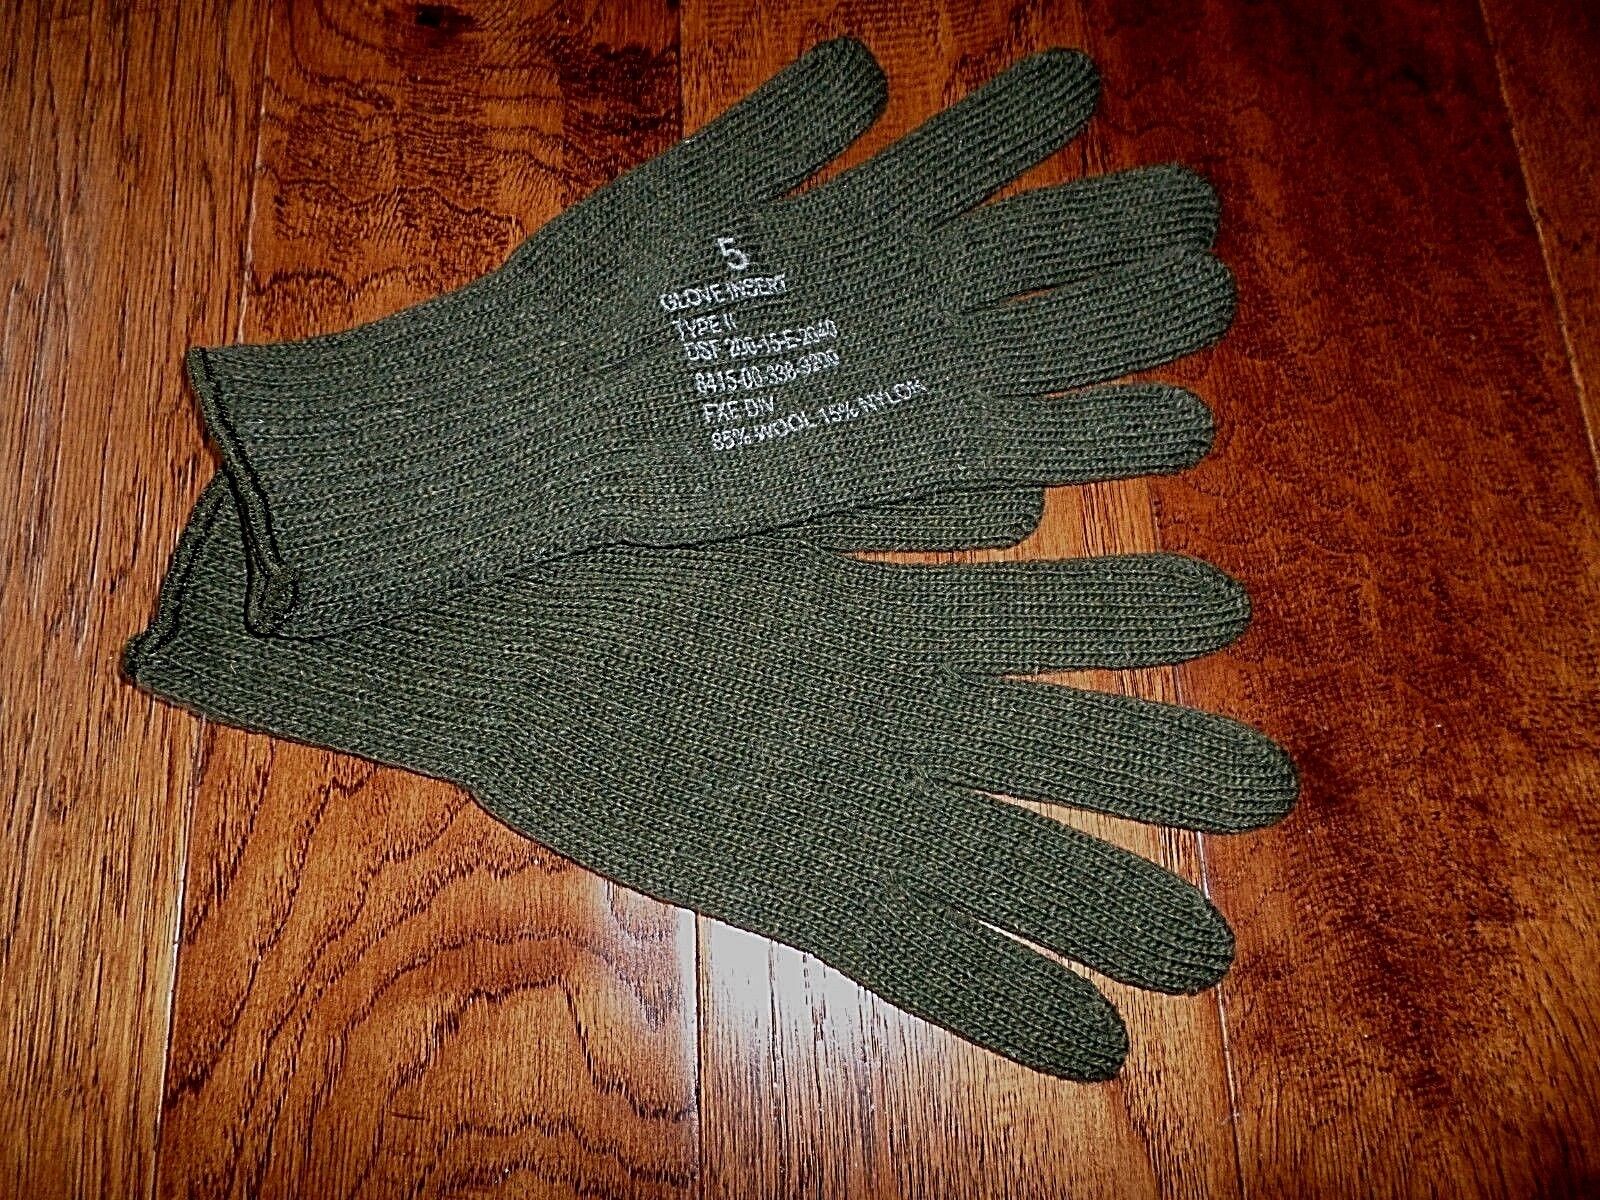 U.S MILITARY STYLE D3A COLD WEATHER GLOVE LINERS 85% WOOL 15% NYLON SIZE LARGE